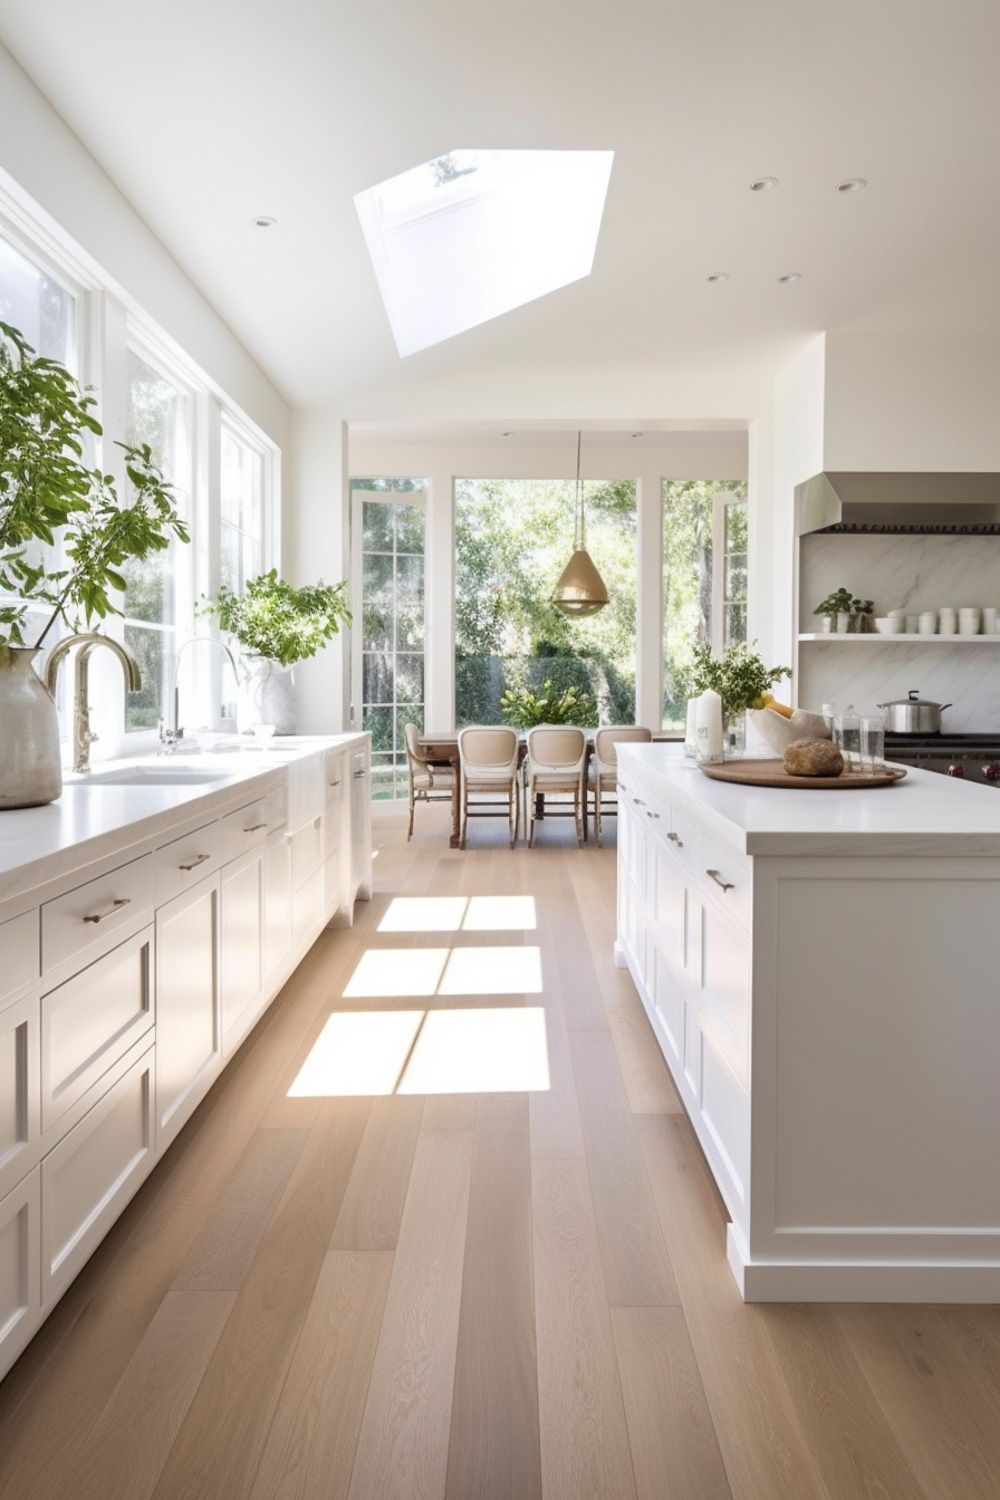 White Kitchen Design Tips for a Clean and Bright Space